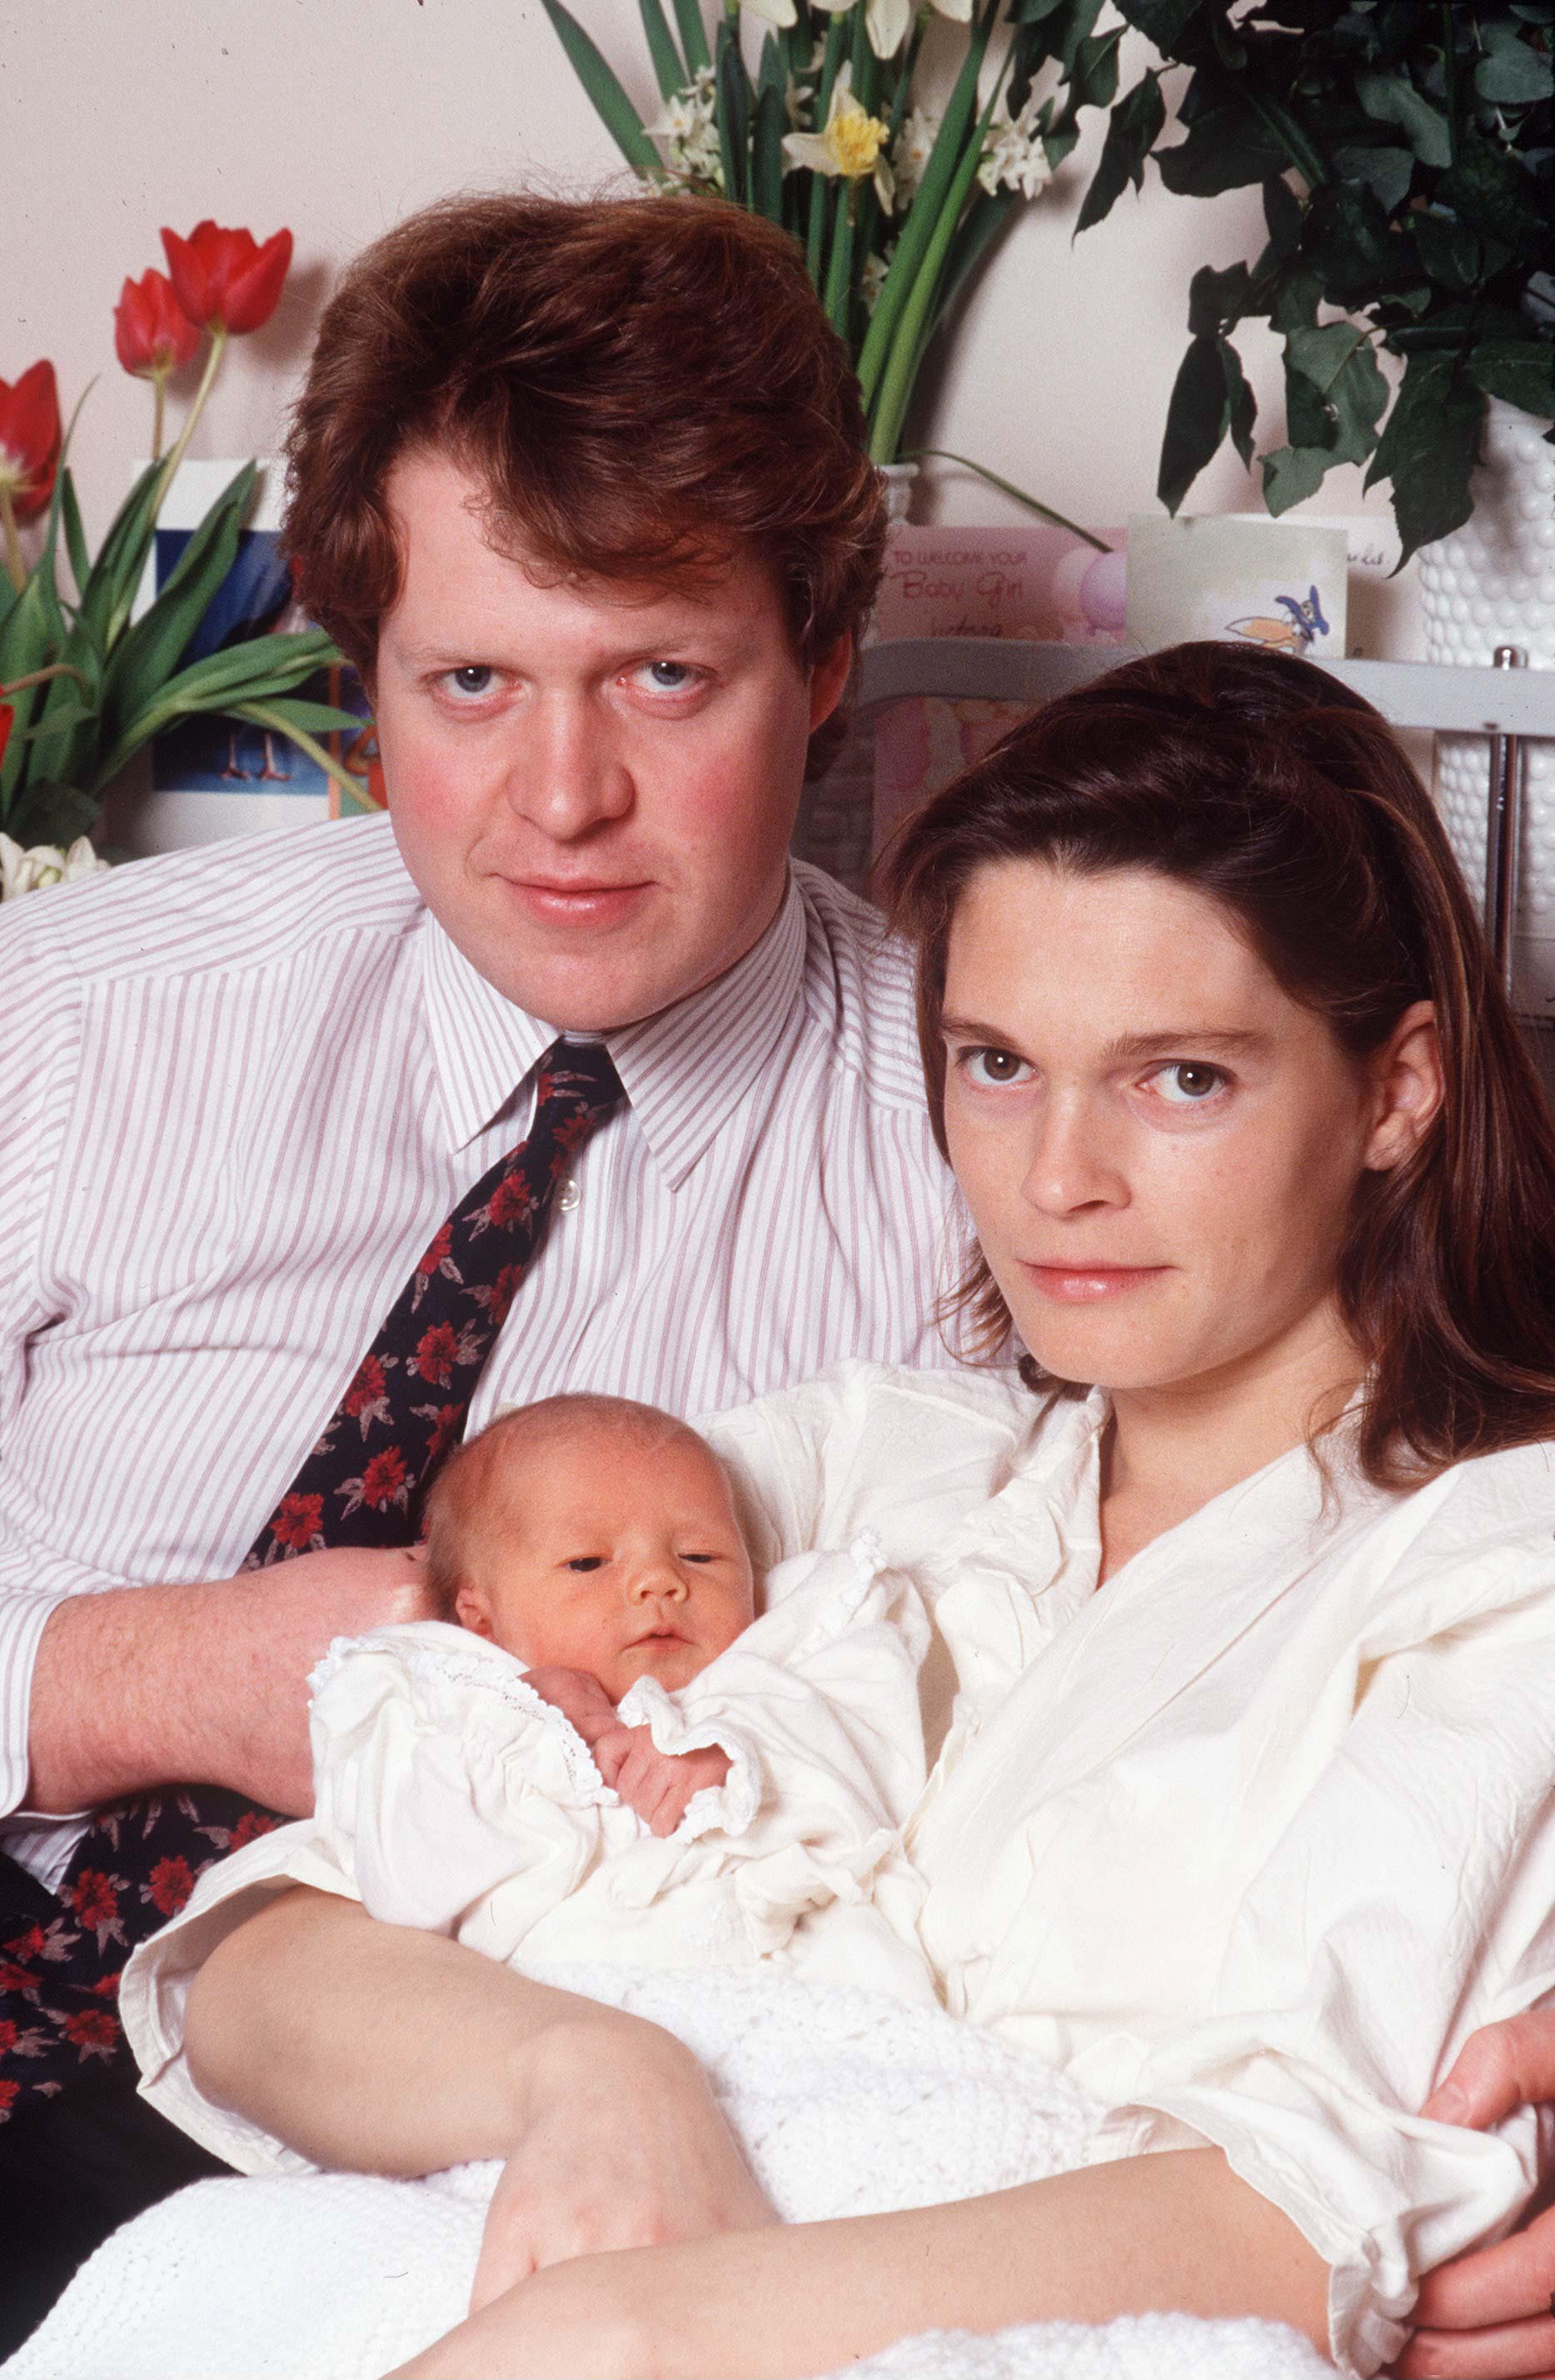 Viscount Althorp (Earl Spencer) and Victoria Spencer with their daughter Kitty Eleanor at St. Mary's Hospital in Paddington, London | Source: Getty Images